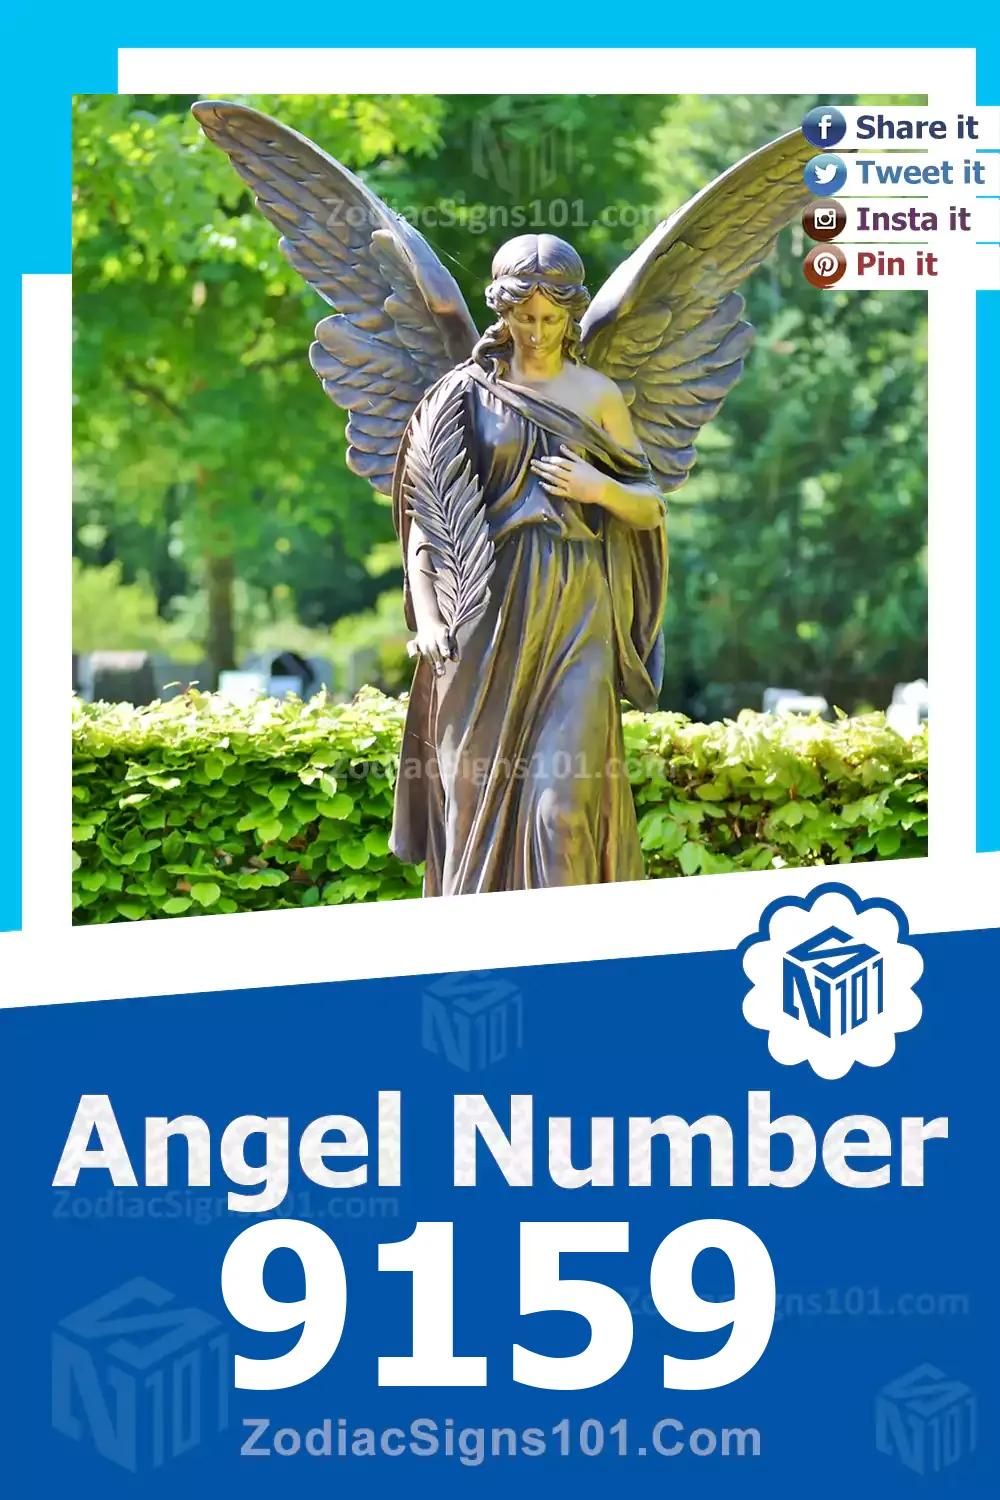 9159 Angel Number Meaning